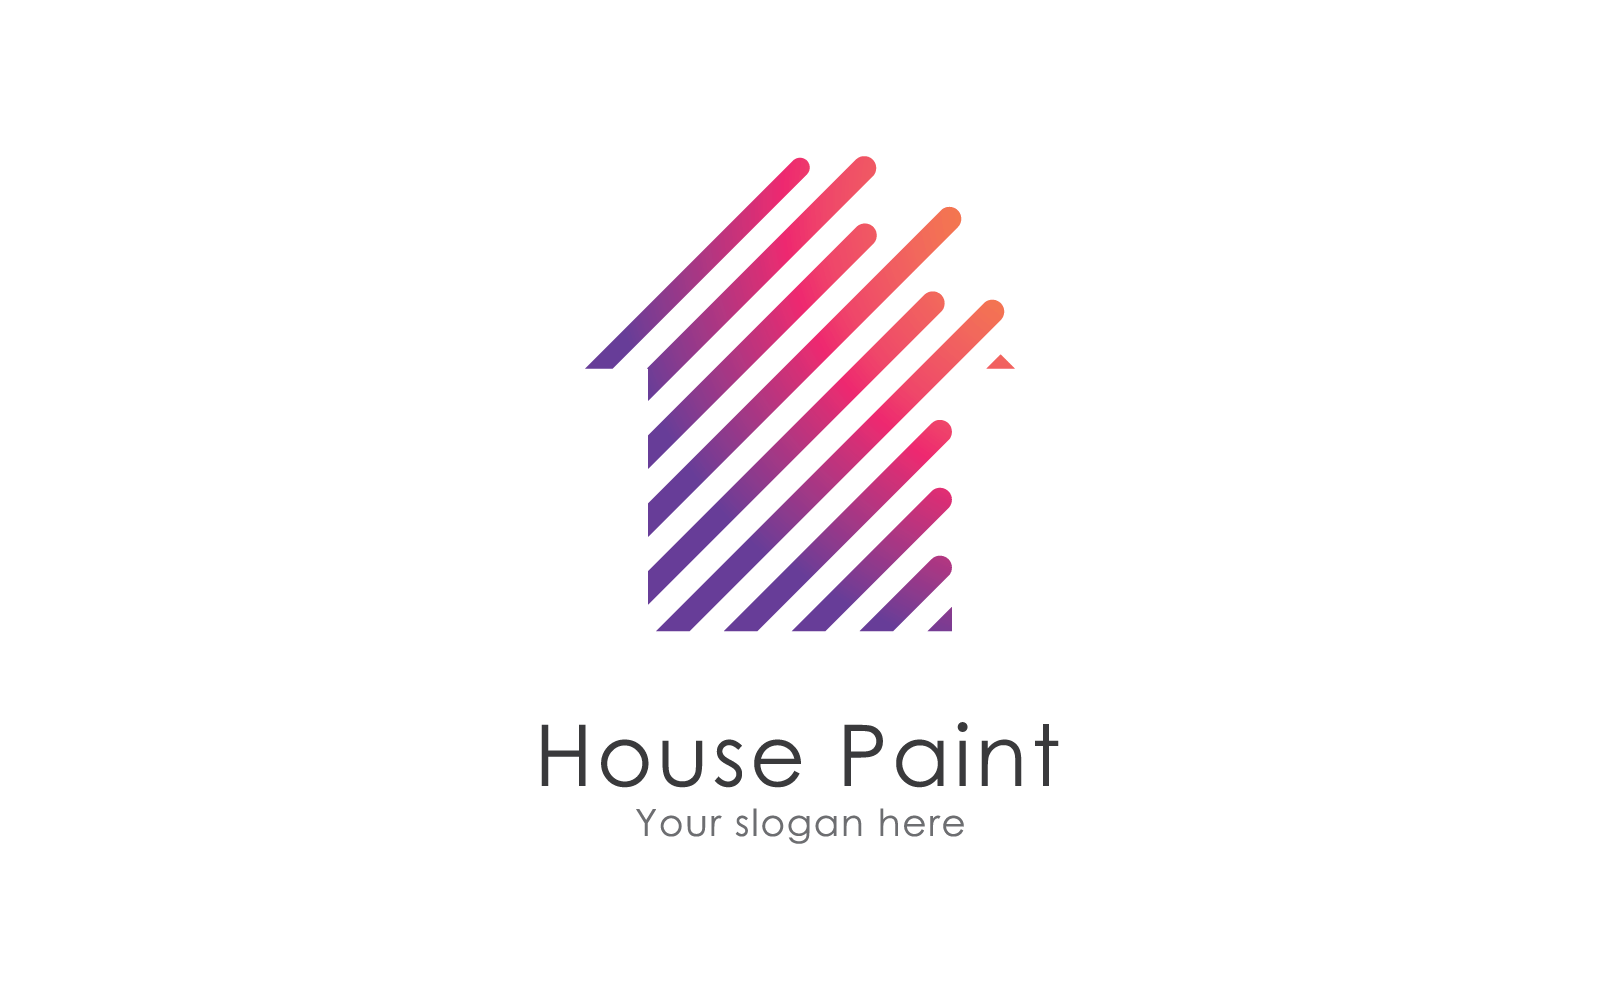 Paint House logo icon business vector design template Logo Template